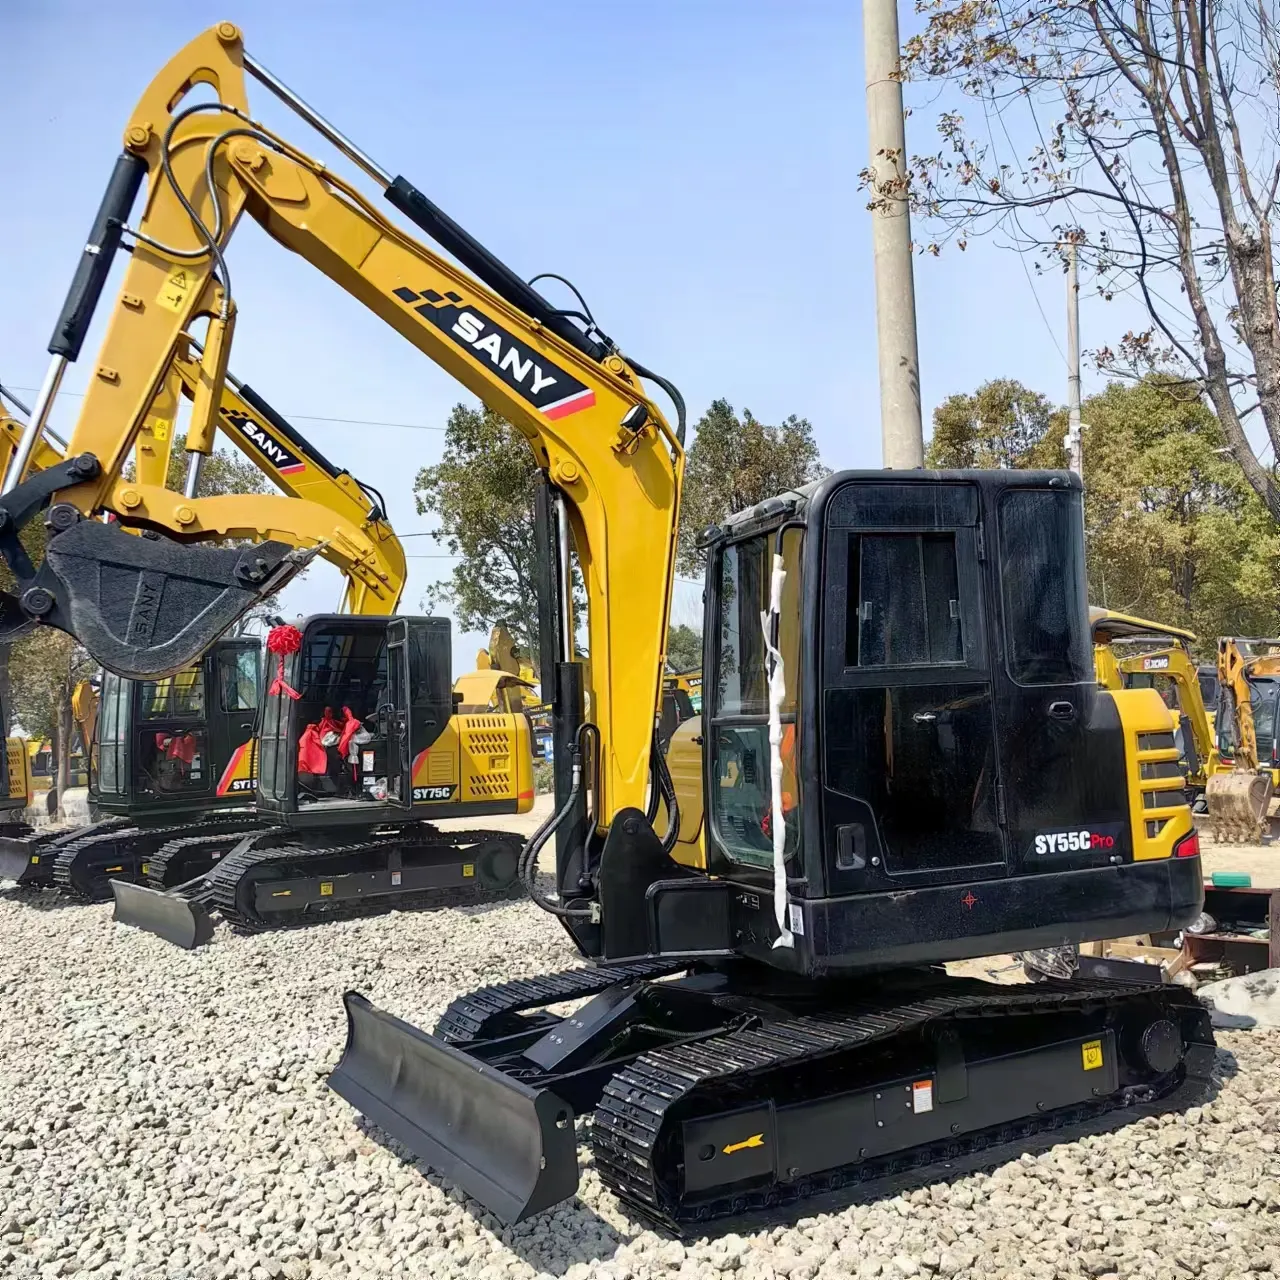 Chinese famous brand SanY SY55C SY60C SY75C SY95C used mini excavator on hot sale with cheapest price and full in stock